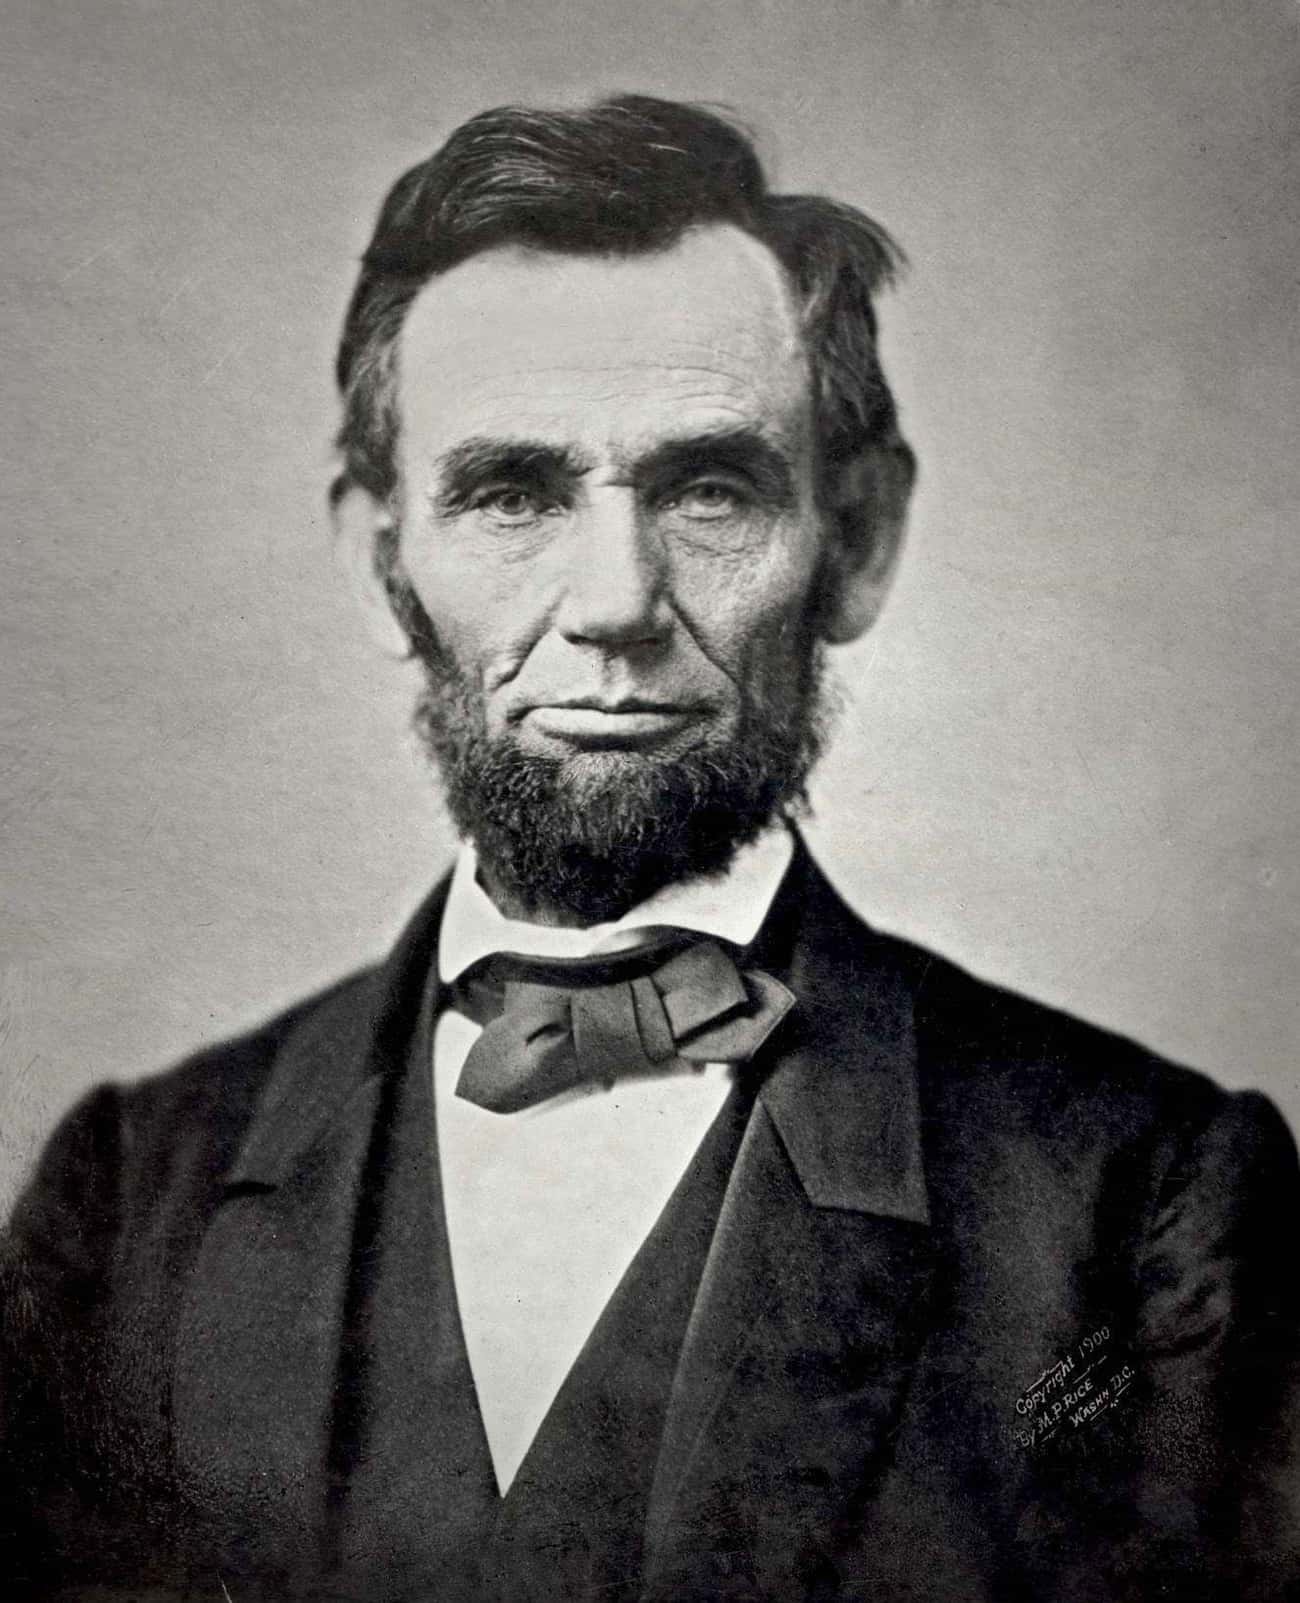 Prominent Figures Of The Time Believed Lincoln’s Support Of &#34;Antislavery Radicals&#34; Would Sacrifice Himself And The Union